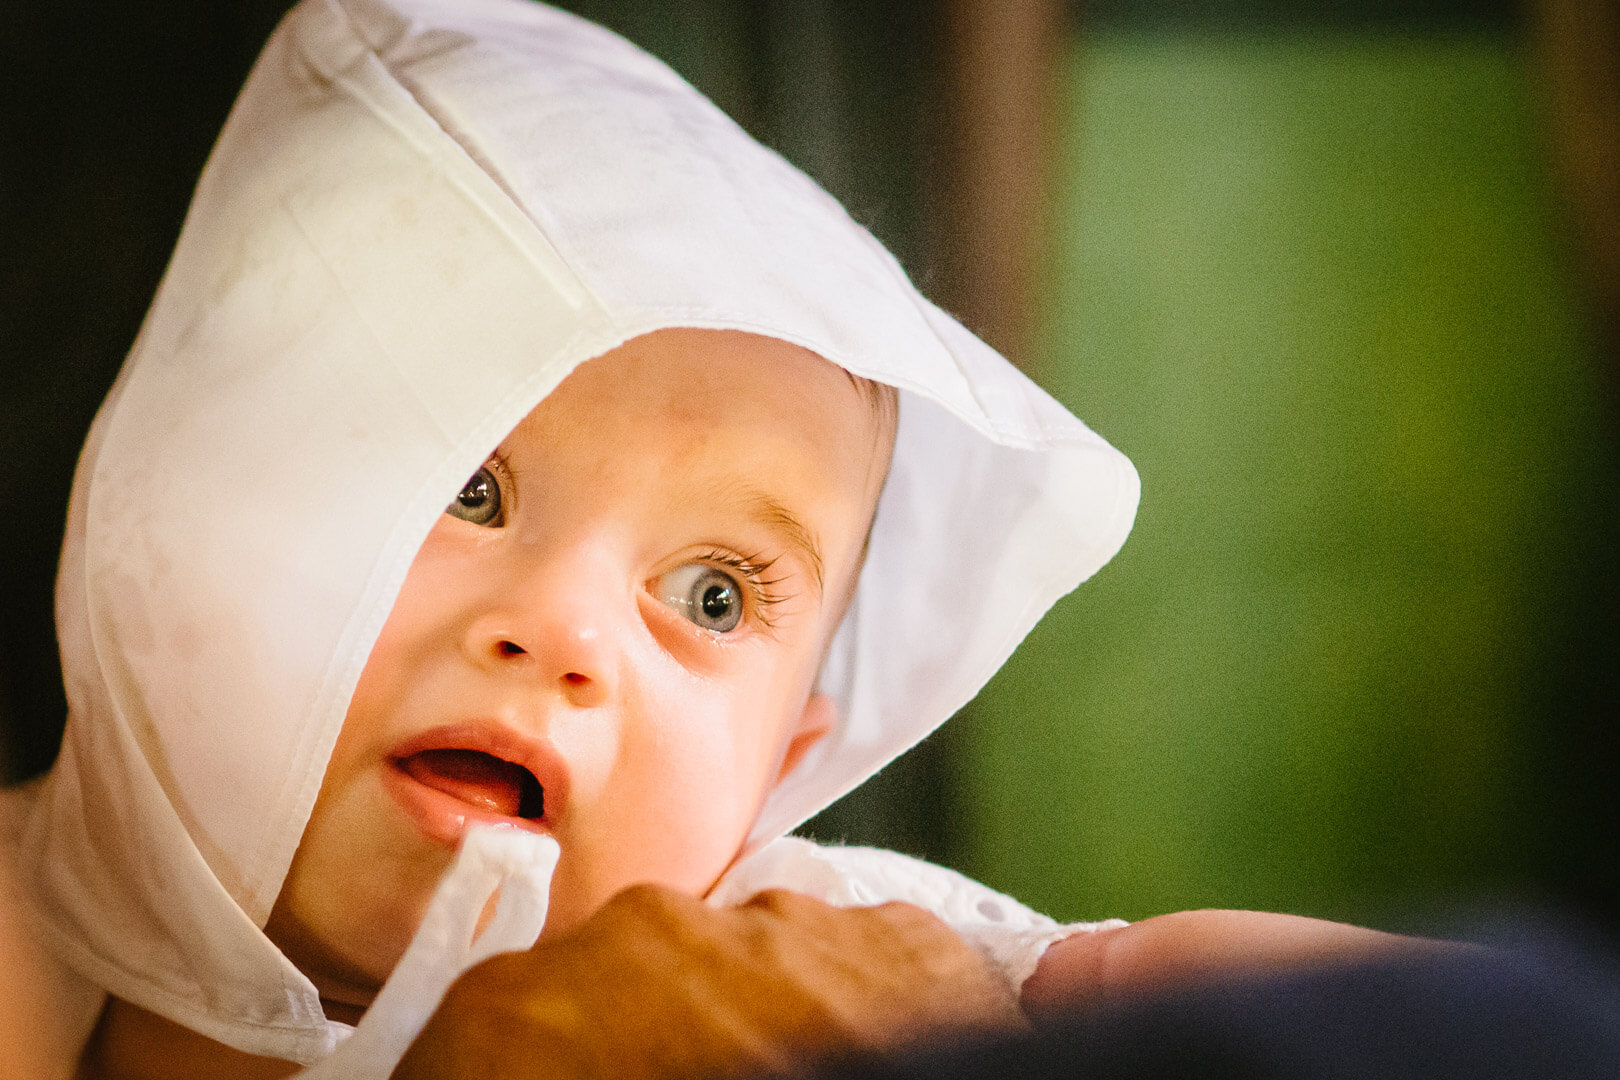 Precious innocence: close-up portrait of a baptized baby, angelic in white.